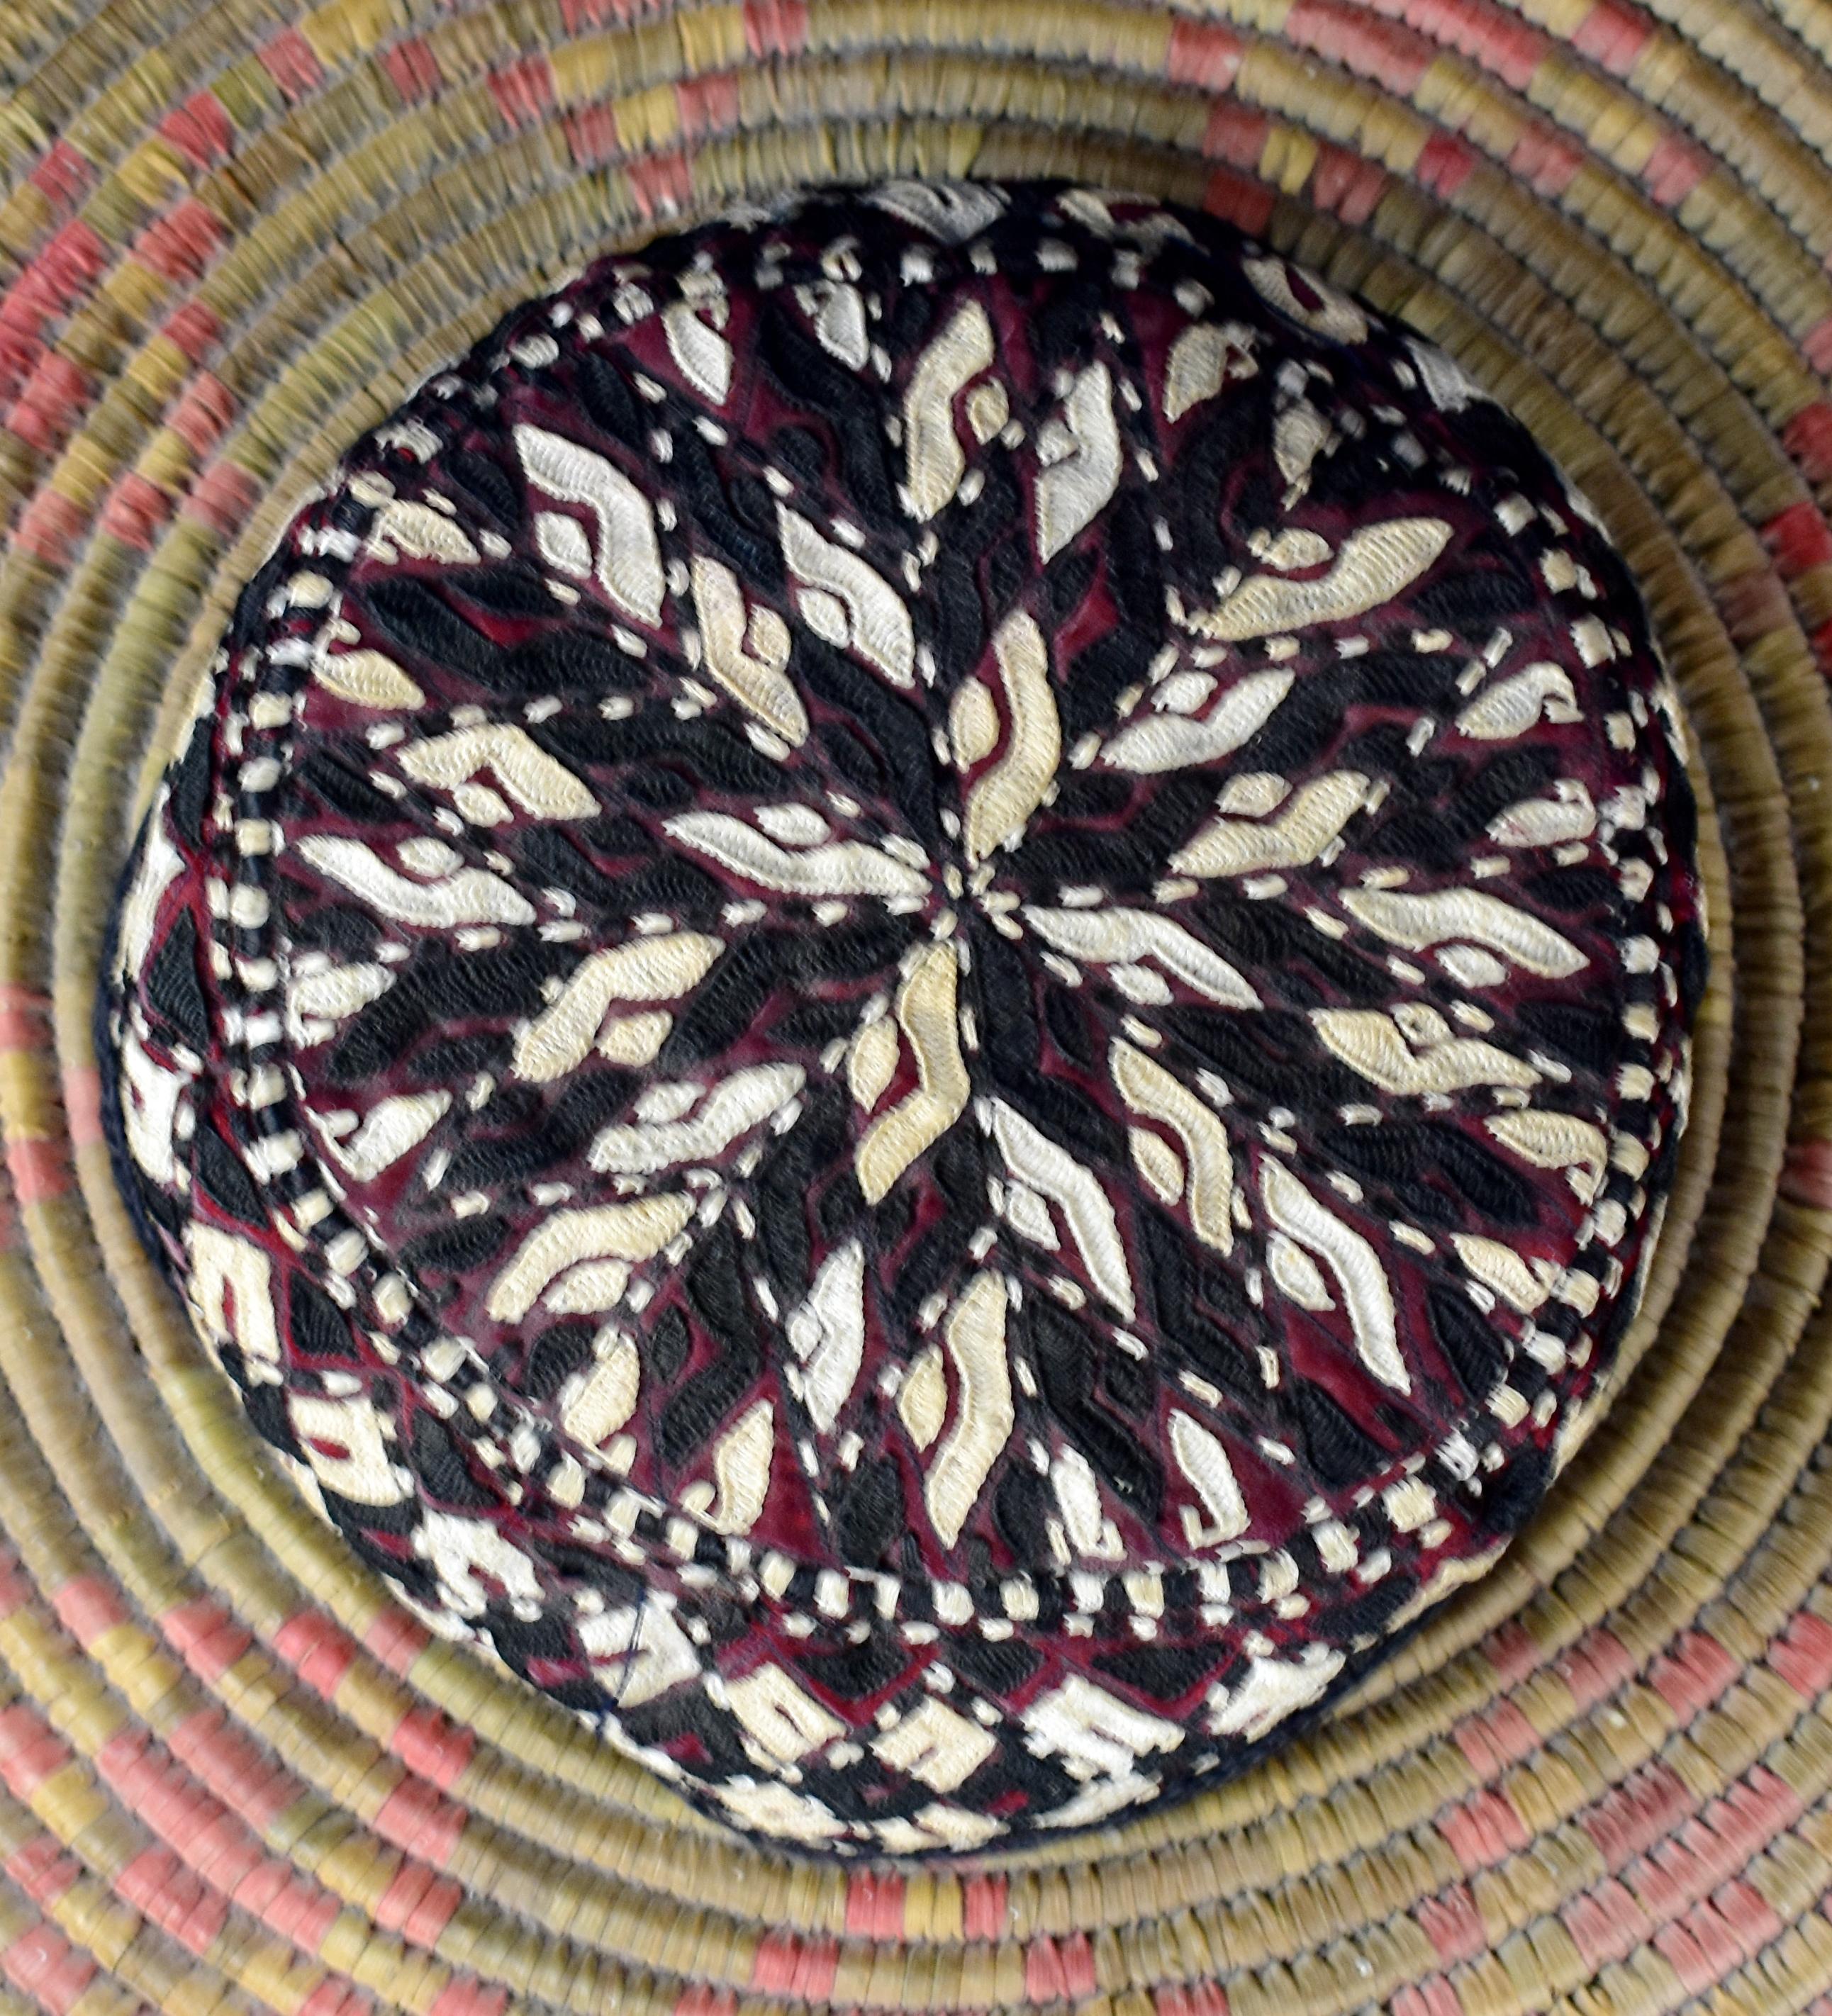 Tekke tribal childs hat, from Turkmenistan circa 1960

Lovely traditional Tekke embroidery


Perfect for display or to add to your colllection.